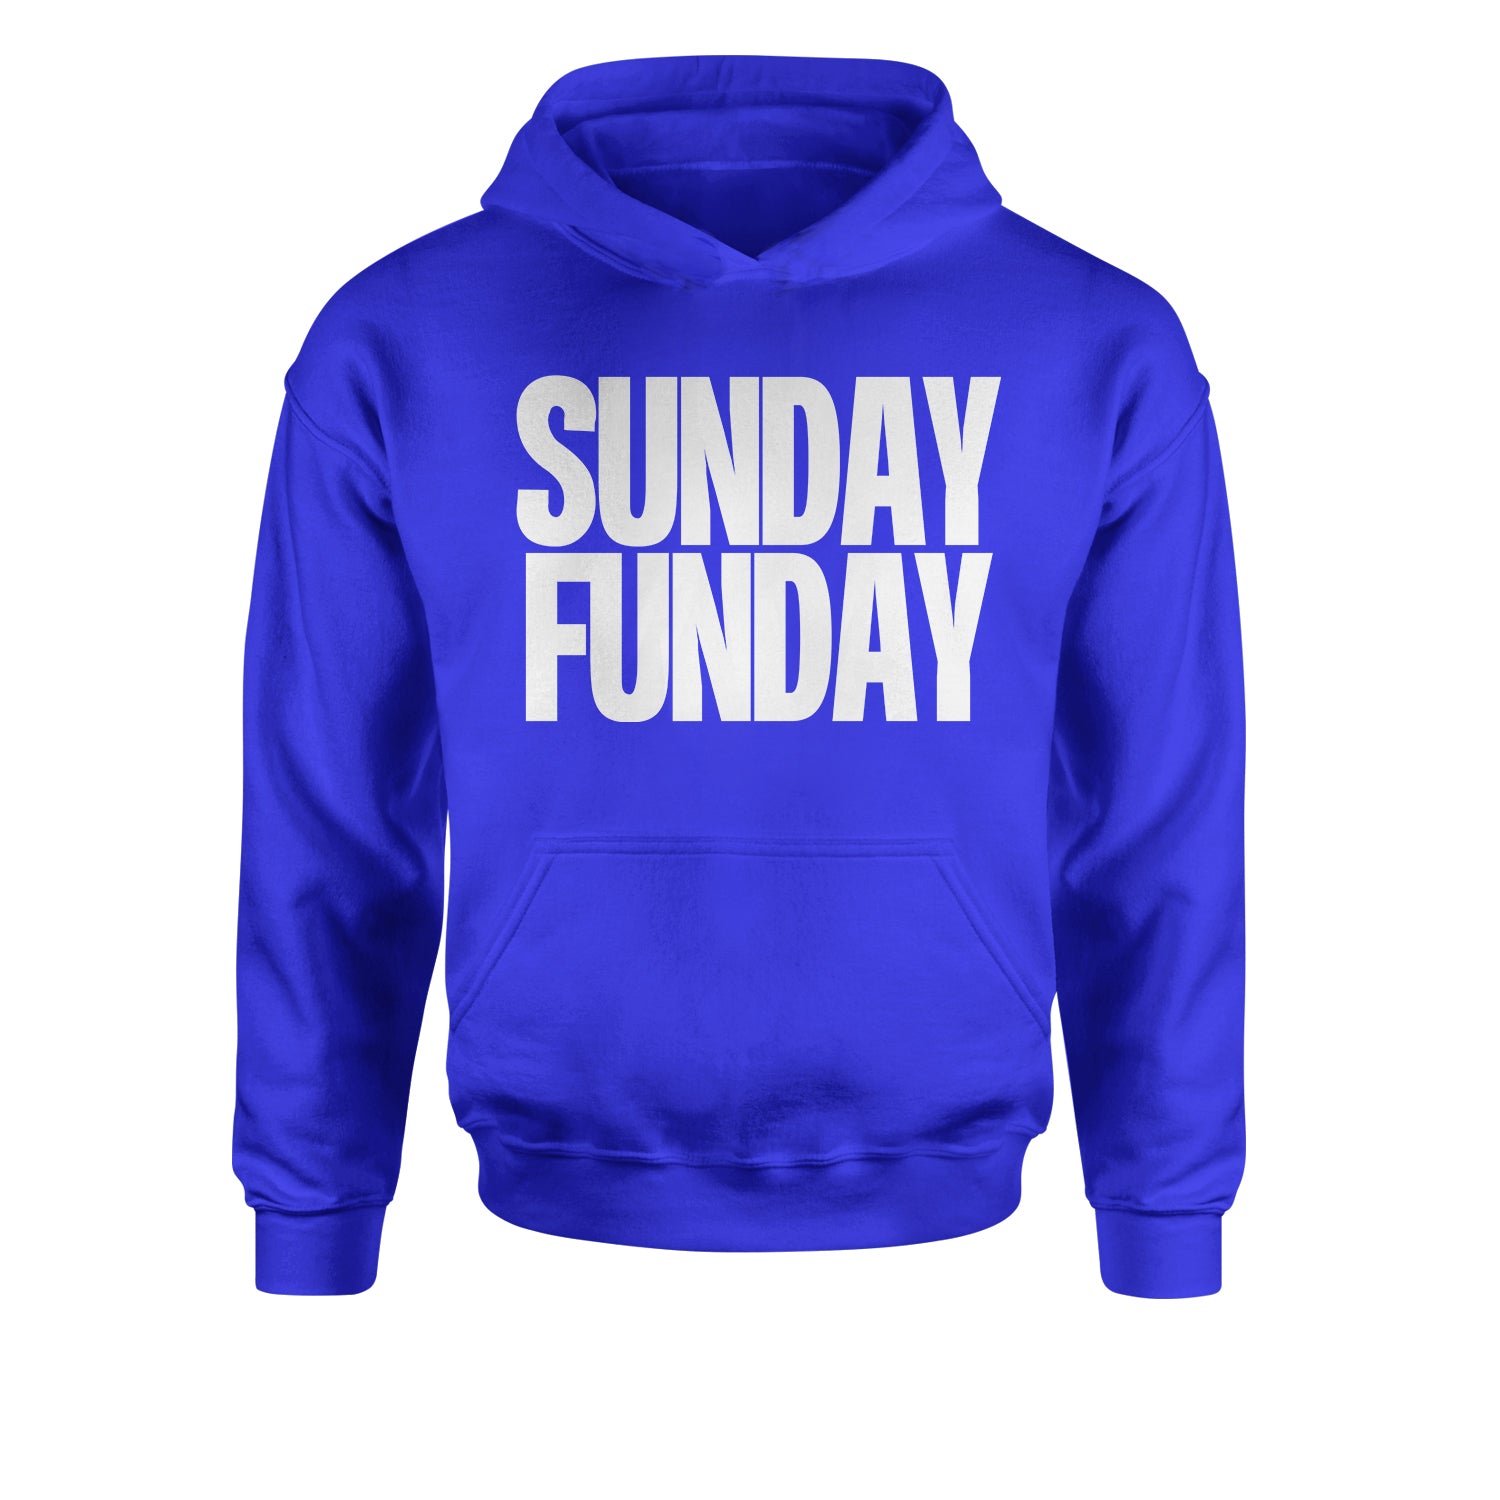 Sunday Funday Youth-Sized Hoodie day, drinking, fun, funday, partying, sun, Sunday, youth-sized by Expression Tees